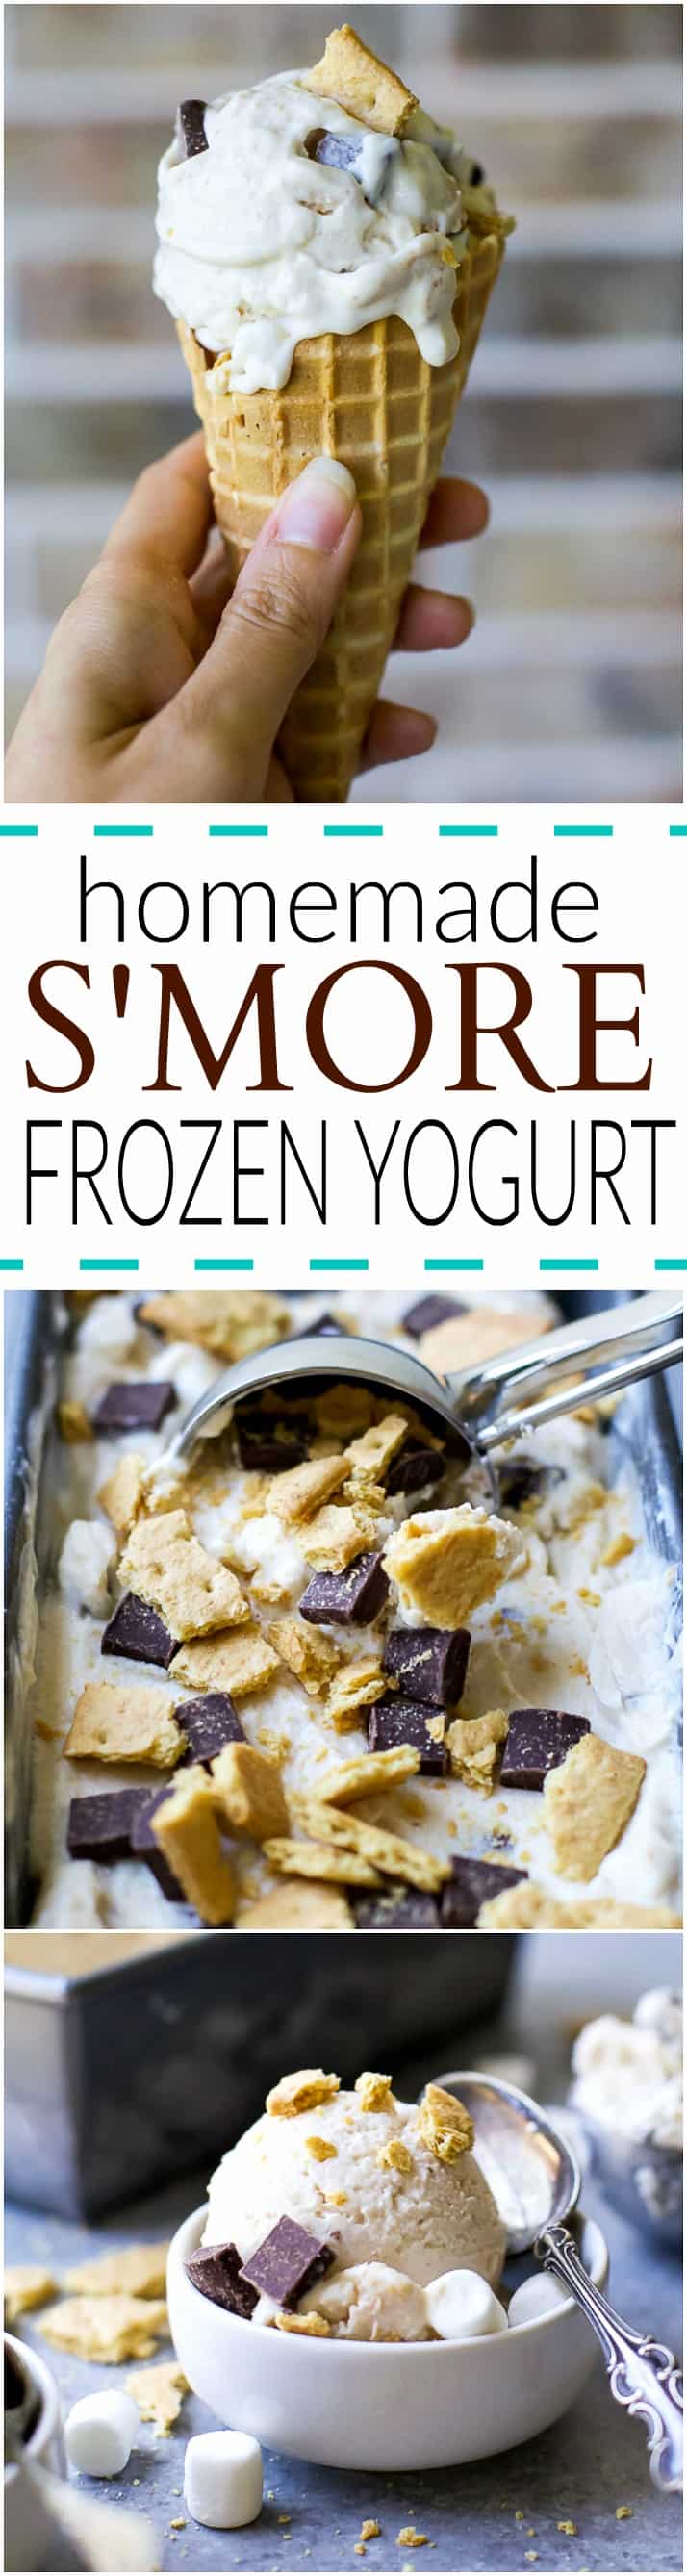 An easy Homemade S'more Frozen Yogurt recipe using only 7 ingredients! Because S'mores and Frozen Yogurt are a staple in the summer! #ad #UndeniablyDairy